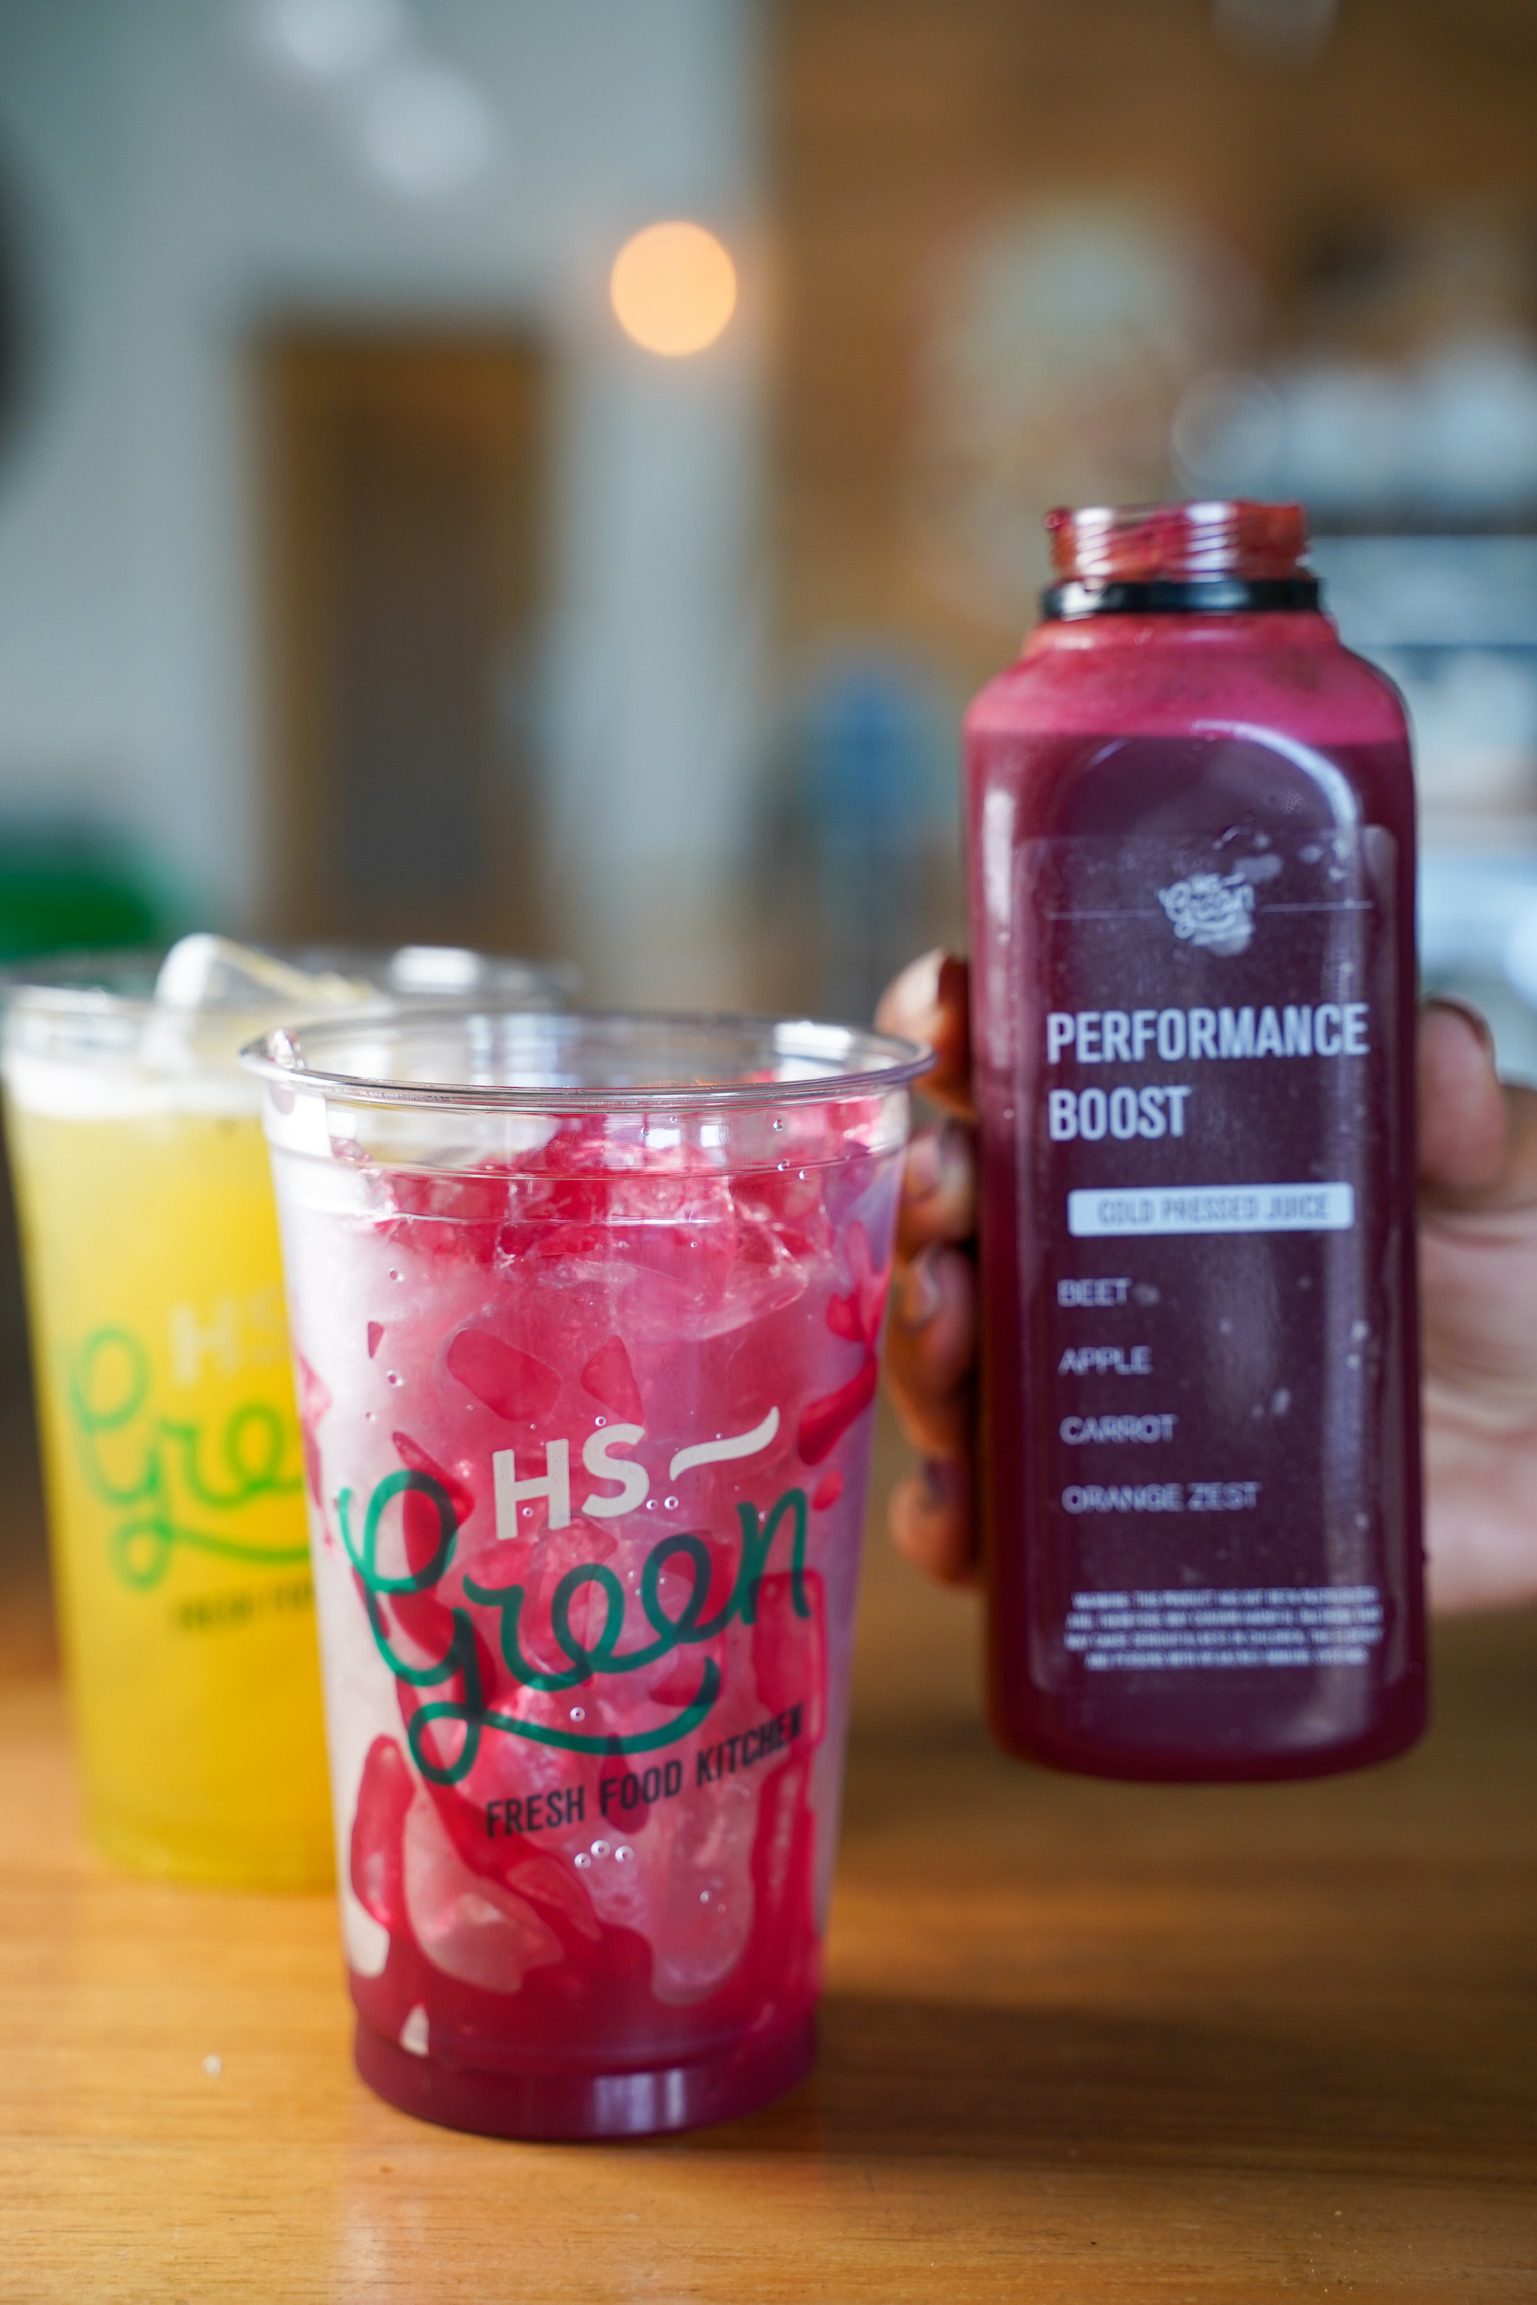 Performance Boost Cold Pressed Juice served on ice.